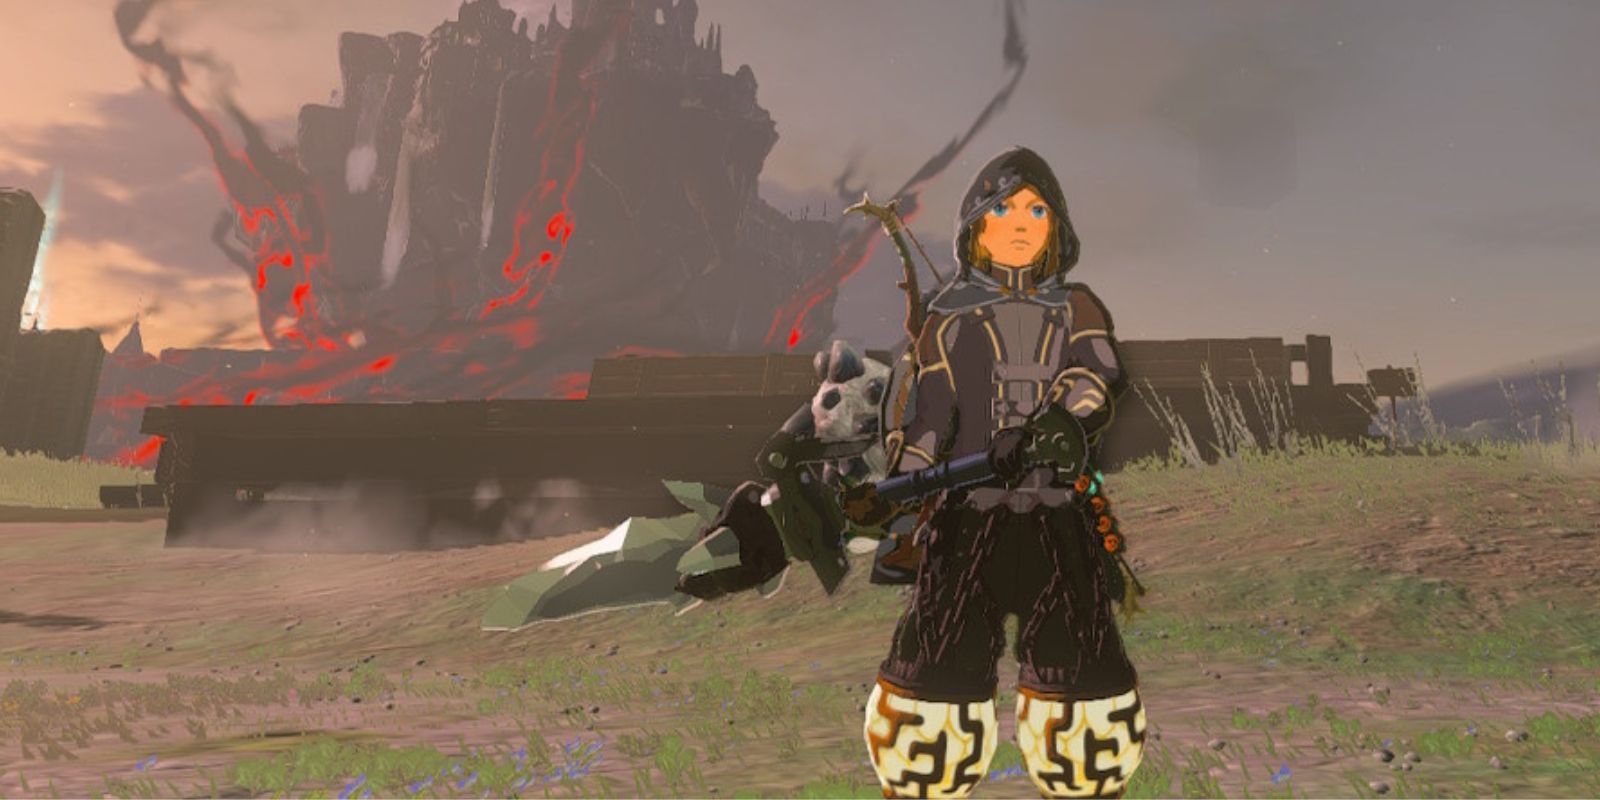 Link holding the Diamond Blade fused weapon in front of the Hyrule castle background